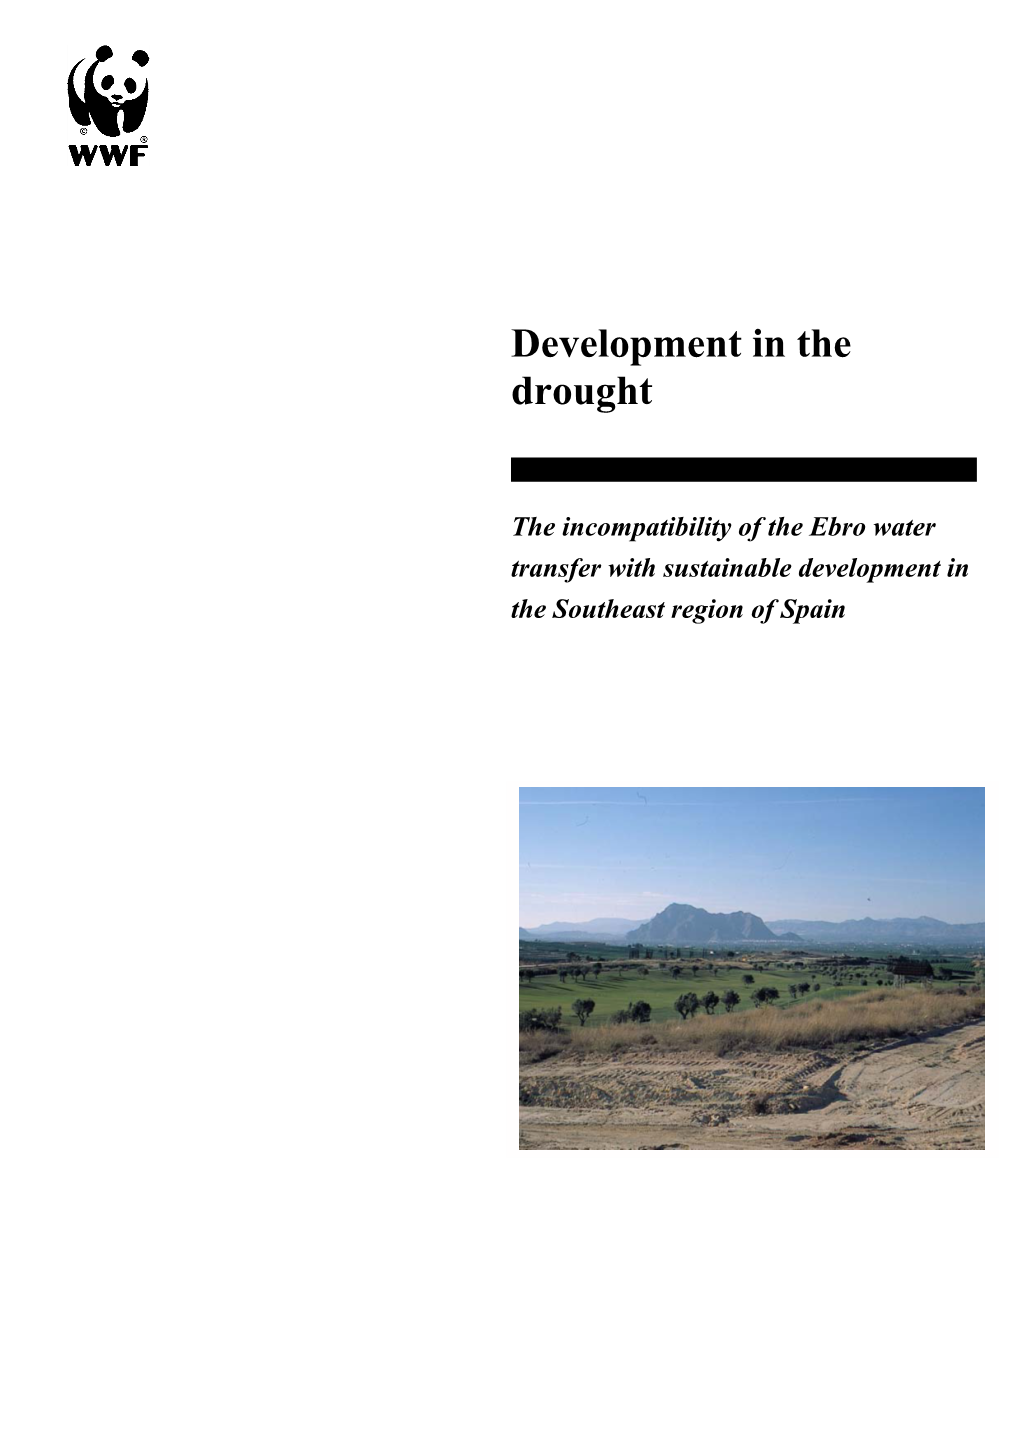 Development in the Drought